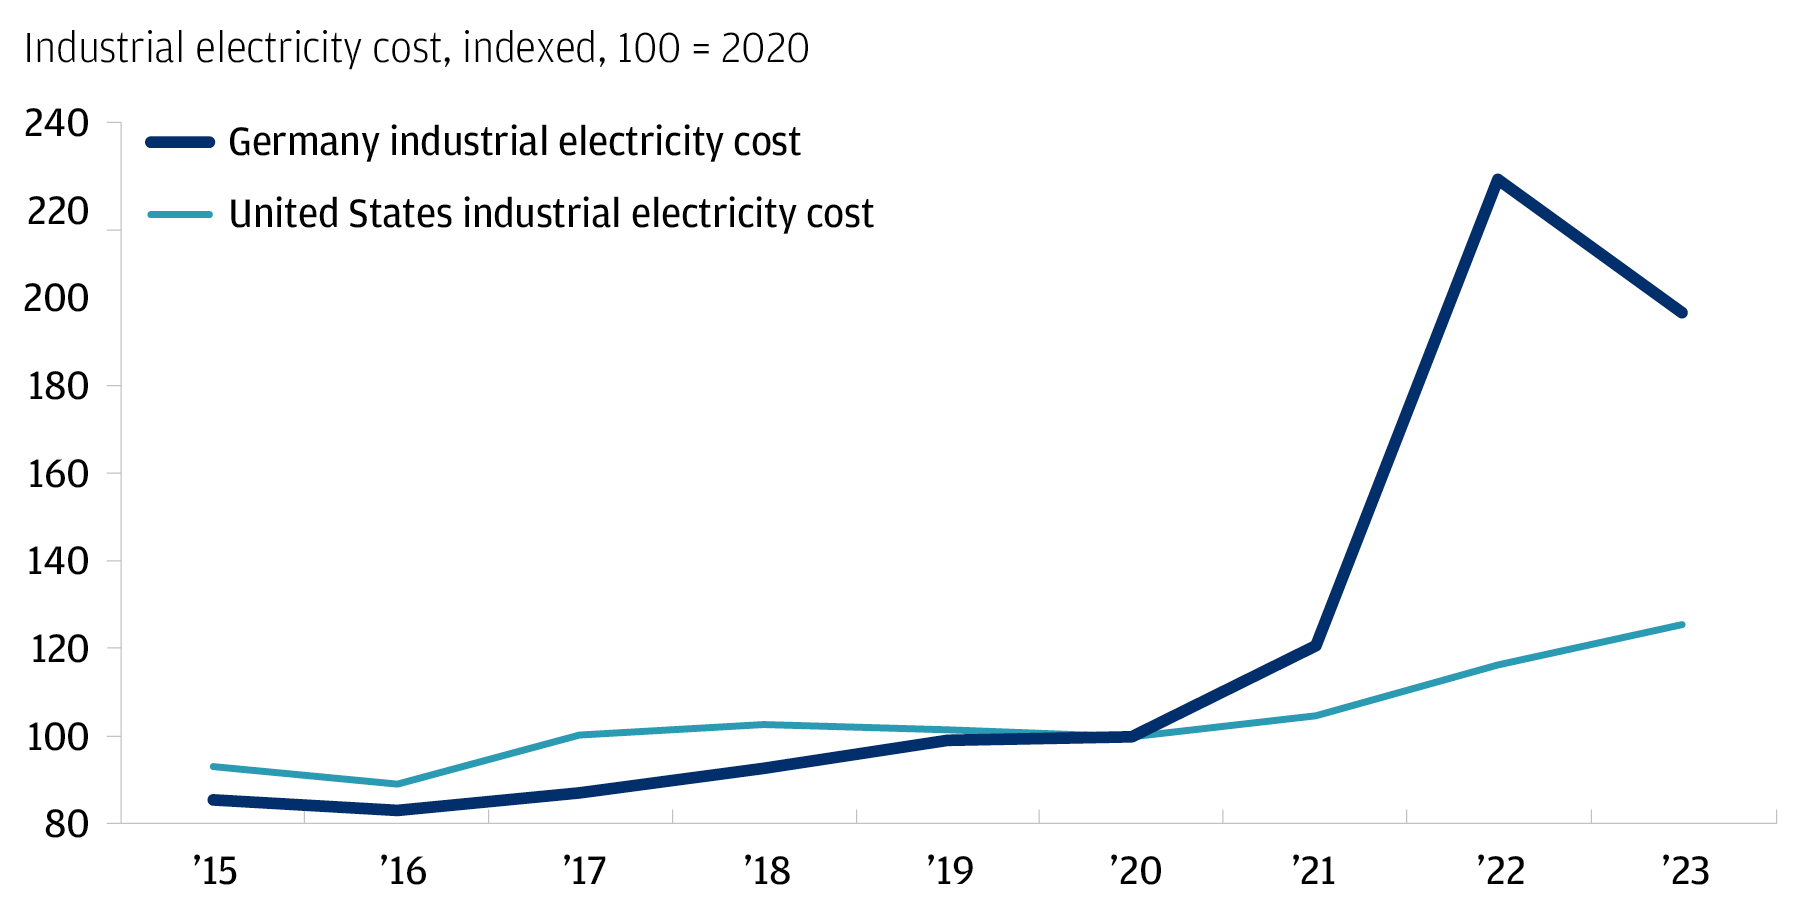 The chart describes U.S. industrial electricity cost vs. Germany industrial electricity cost indexed at 100 for 2020. 